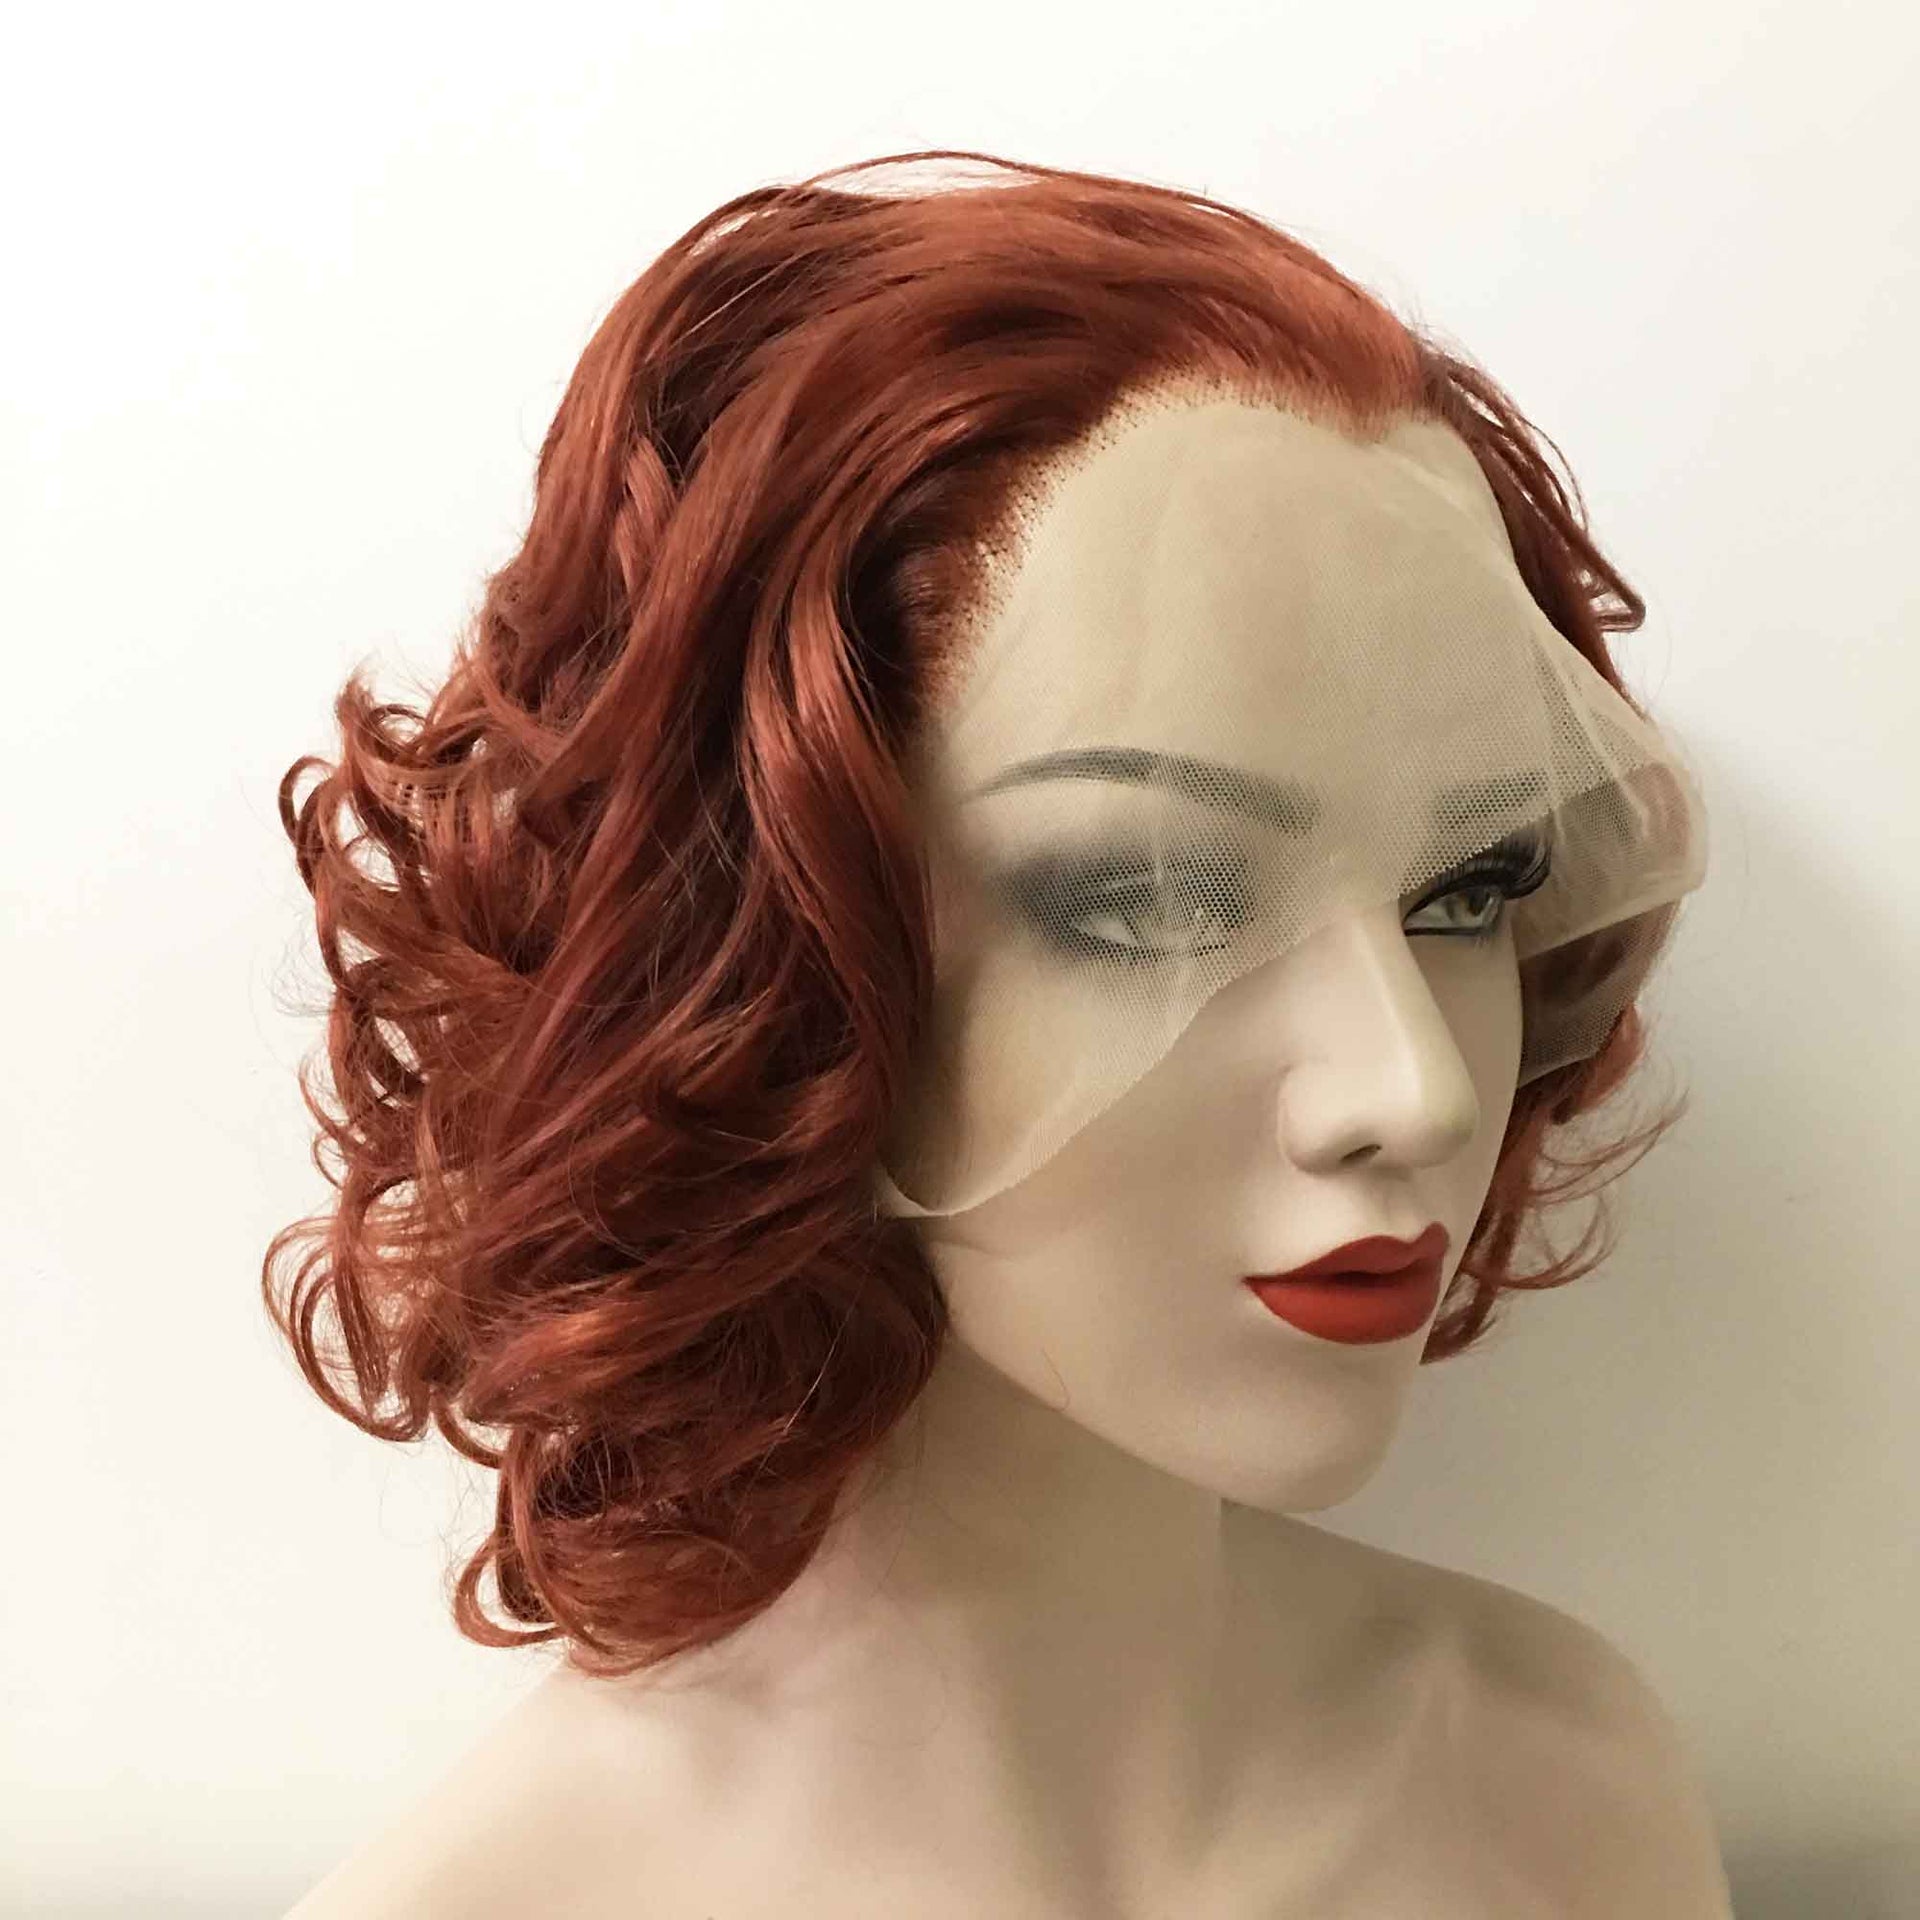 nevermindyrhead Women Dark Red Lace Front Short Curly Vintage Style Slicked Back Wig